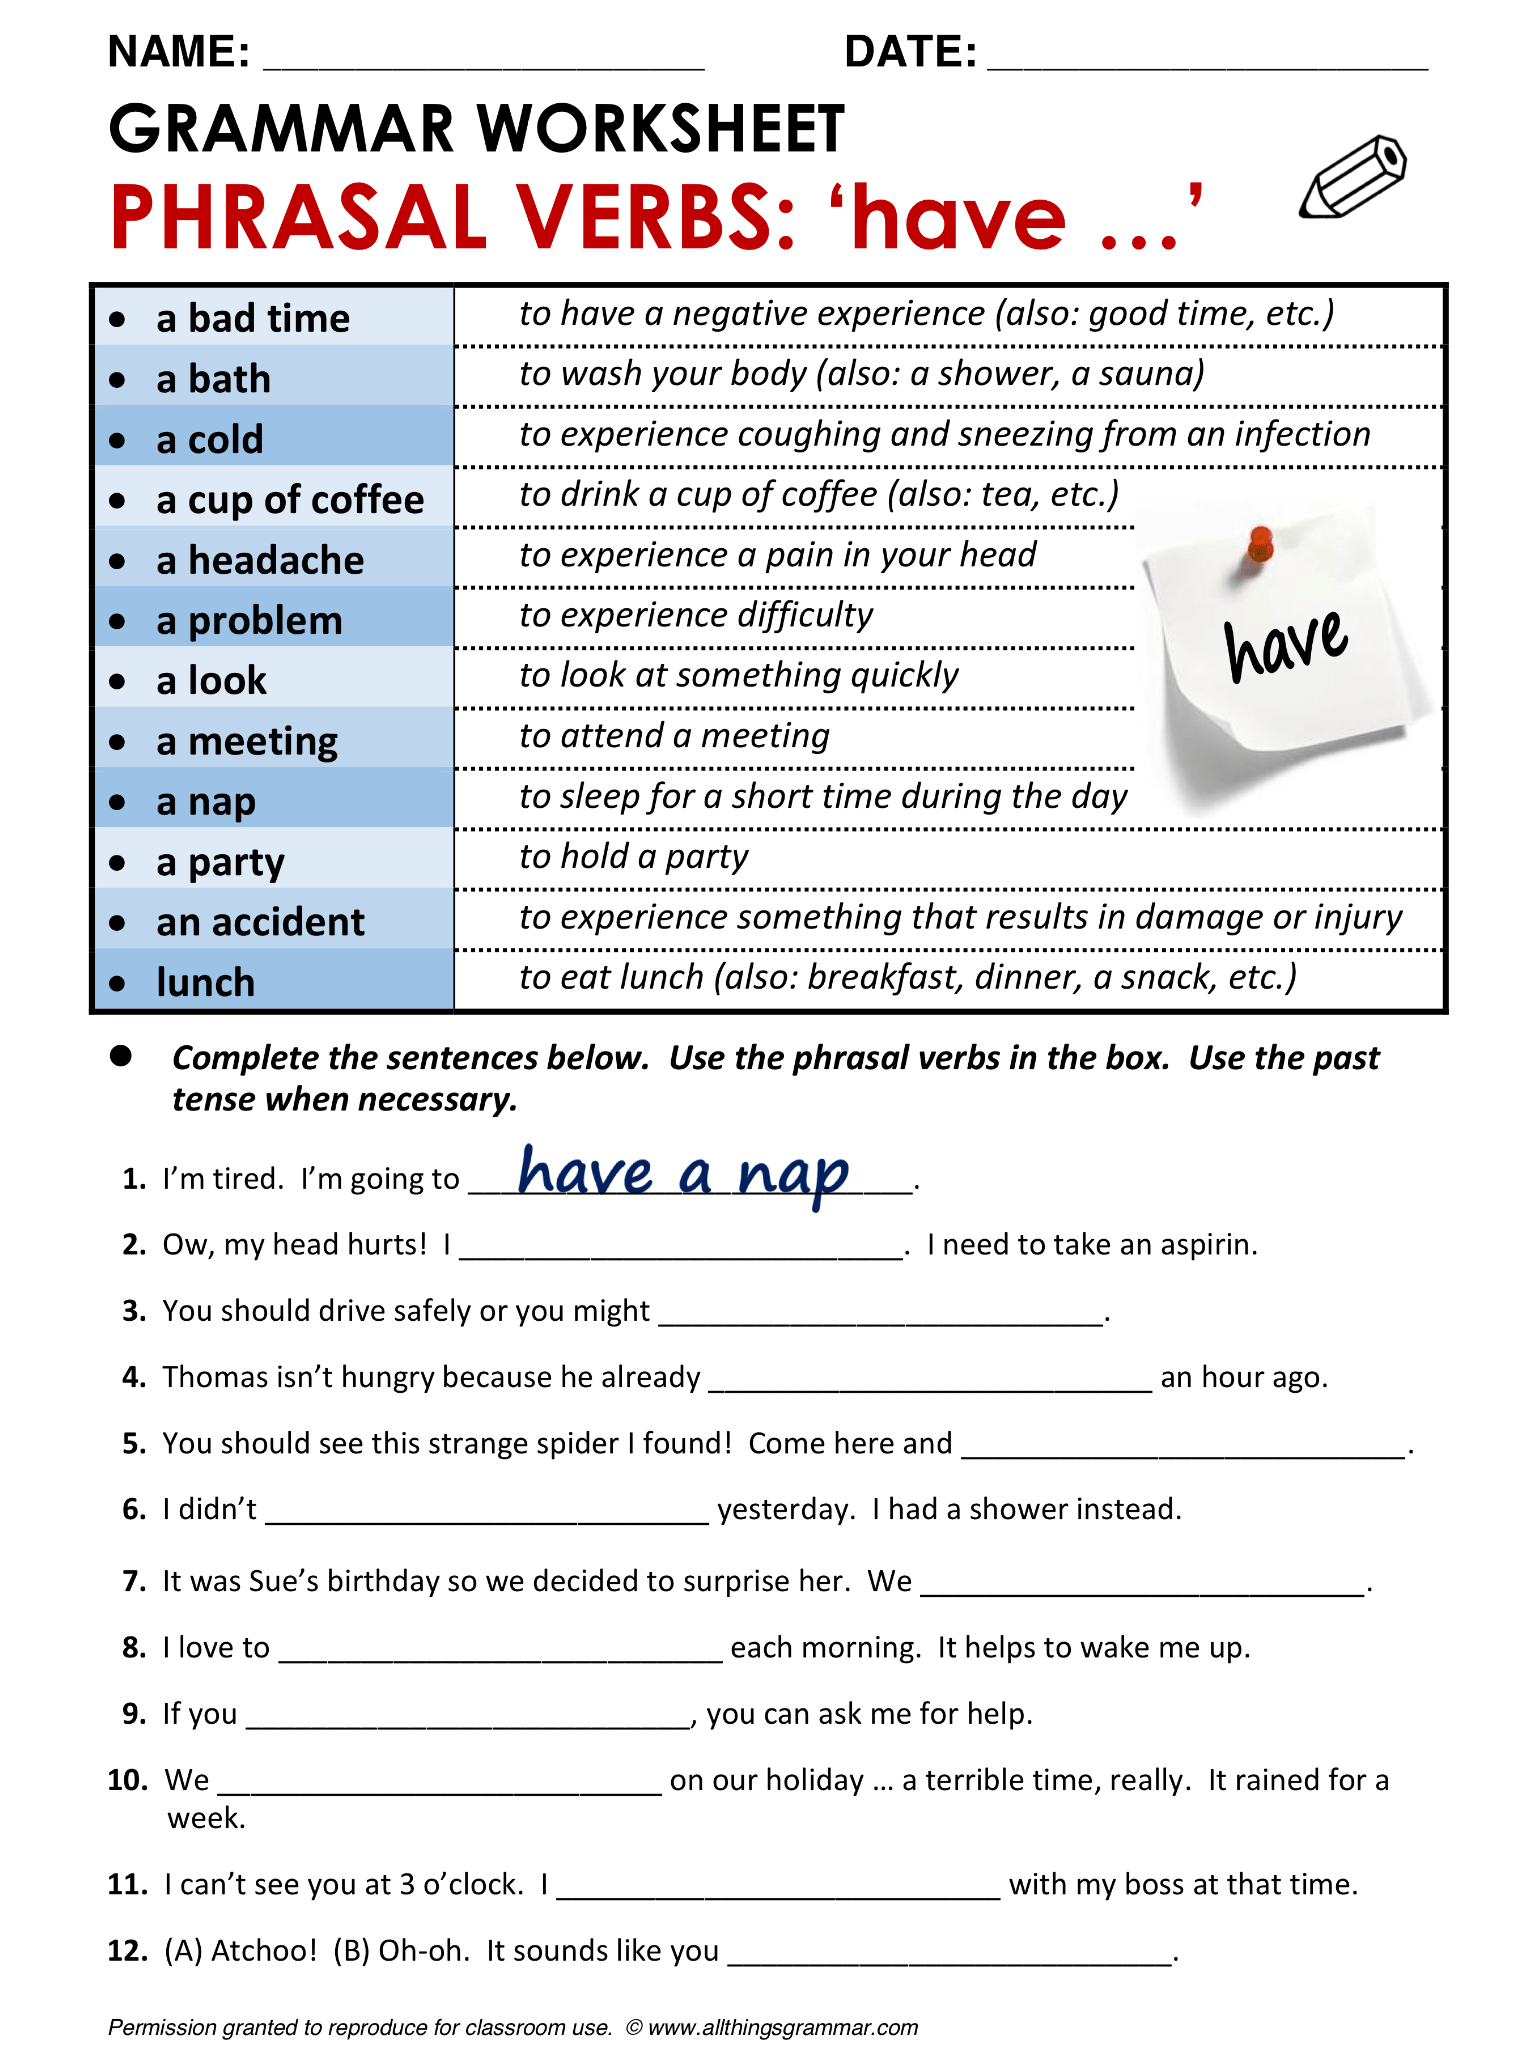 Free Printable Grammar Worksheets For Highschool Students Peggy 